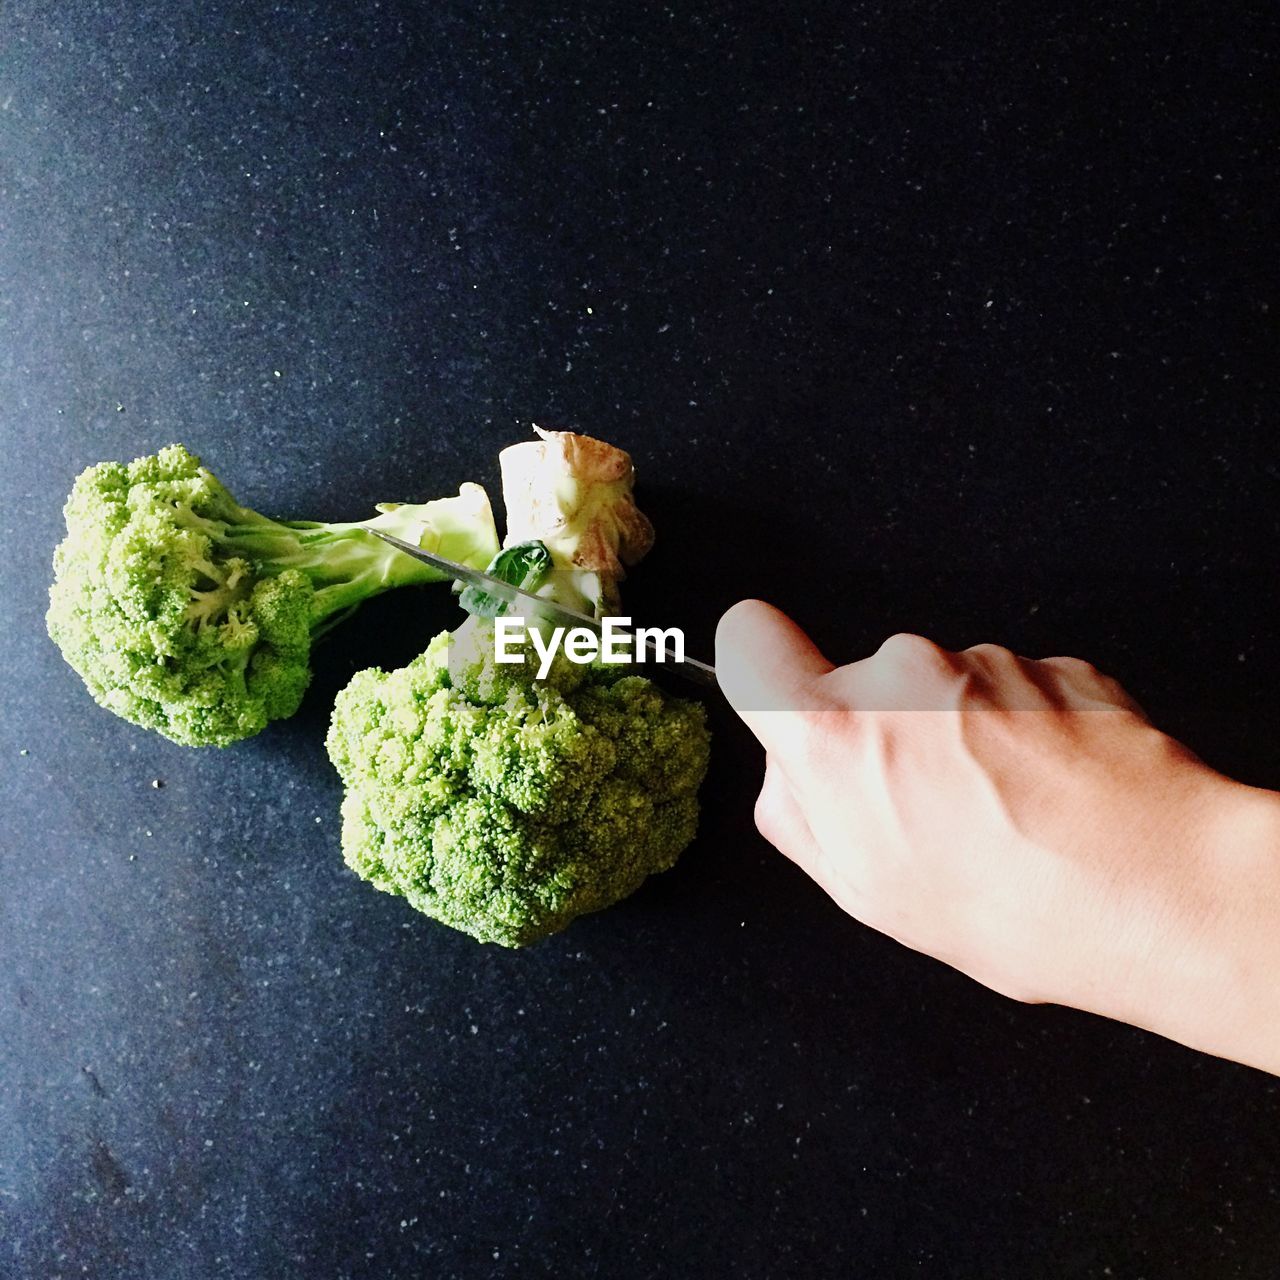 Cropped image of person chopping broccoli on table